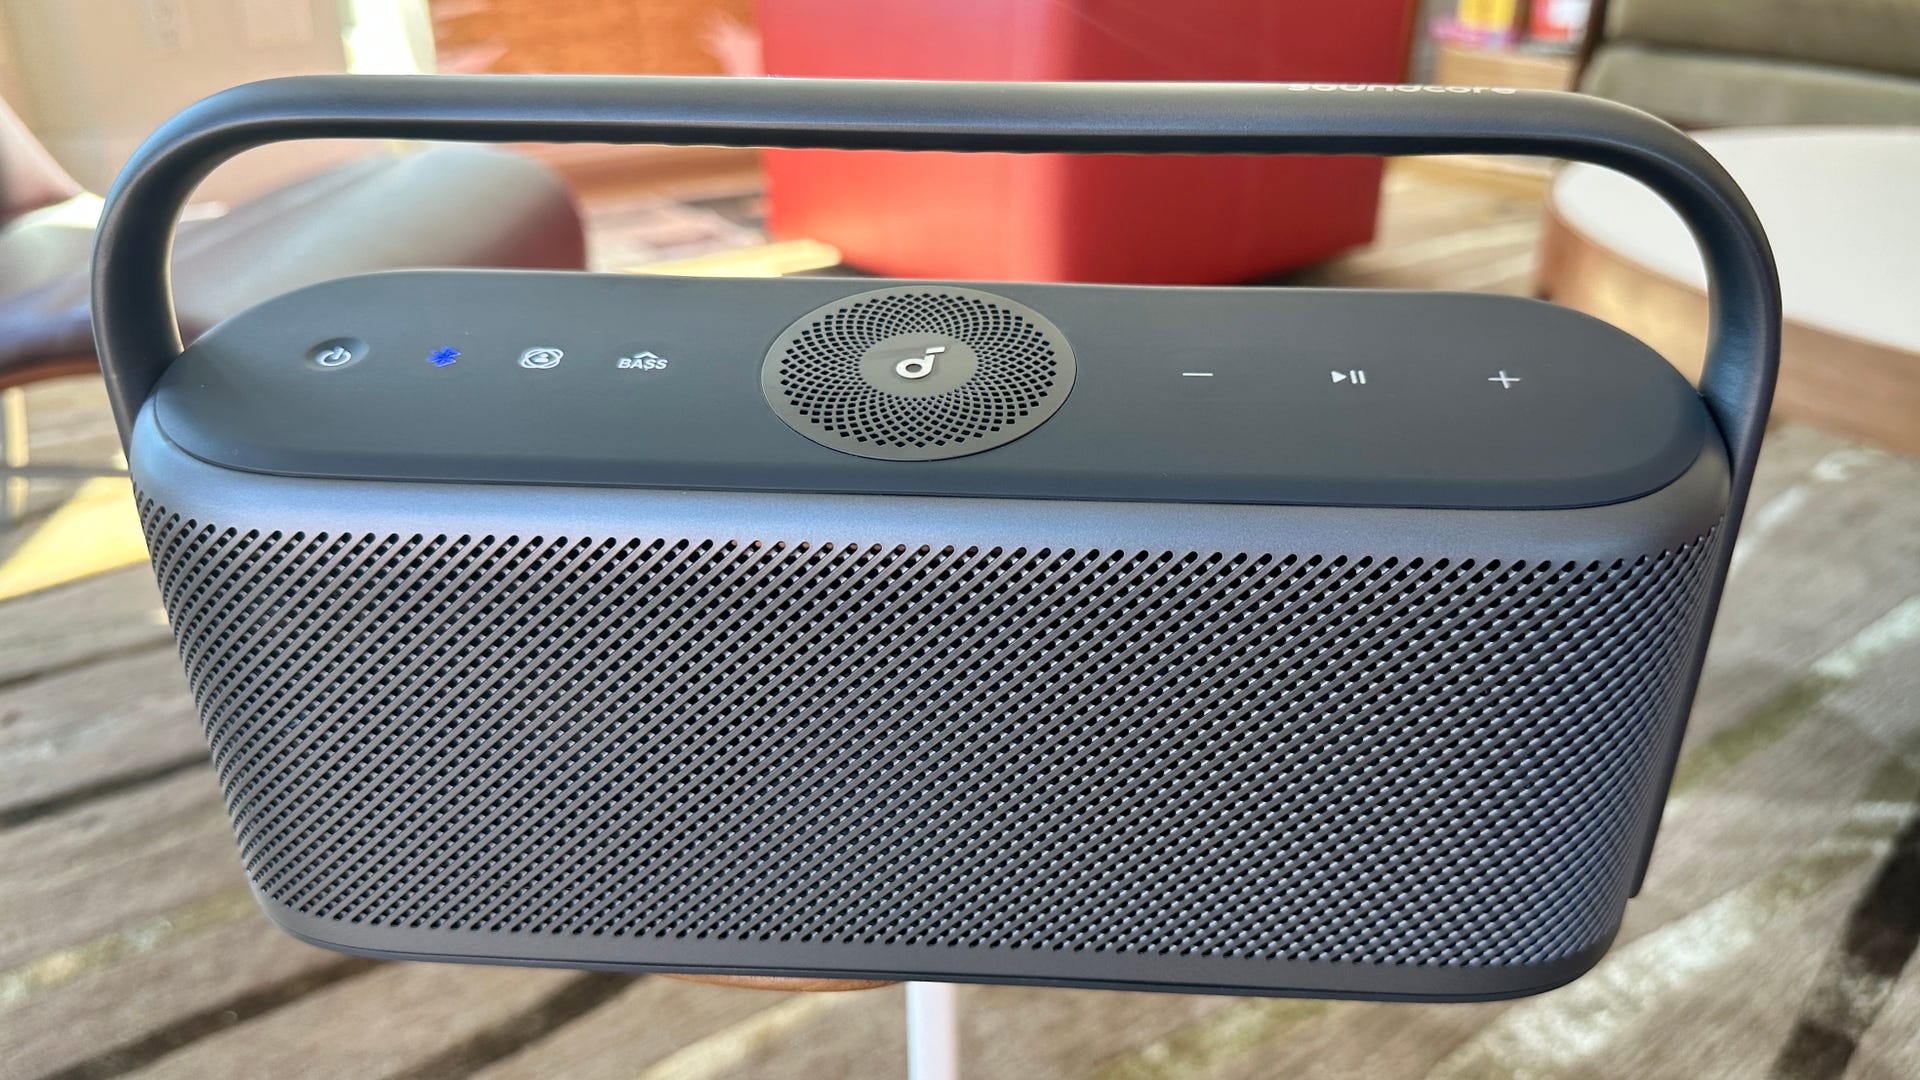 Get $50 Off Anker's Swanky New Motion X600 Bluetooth Speaker With